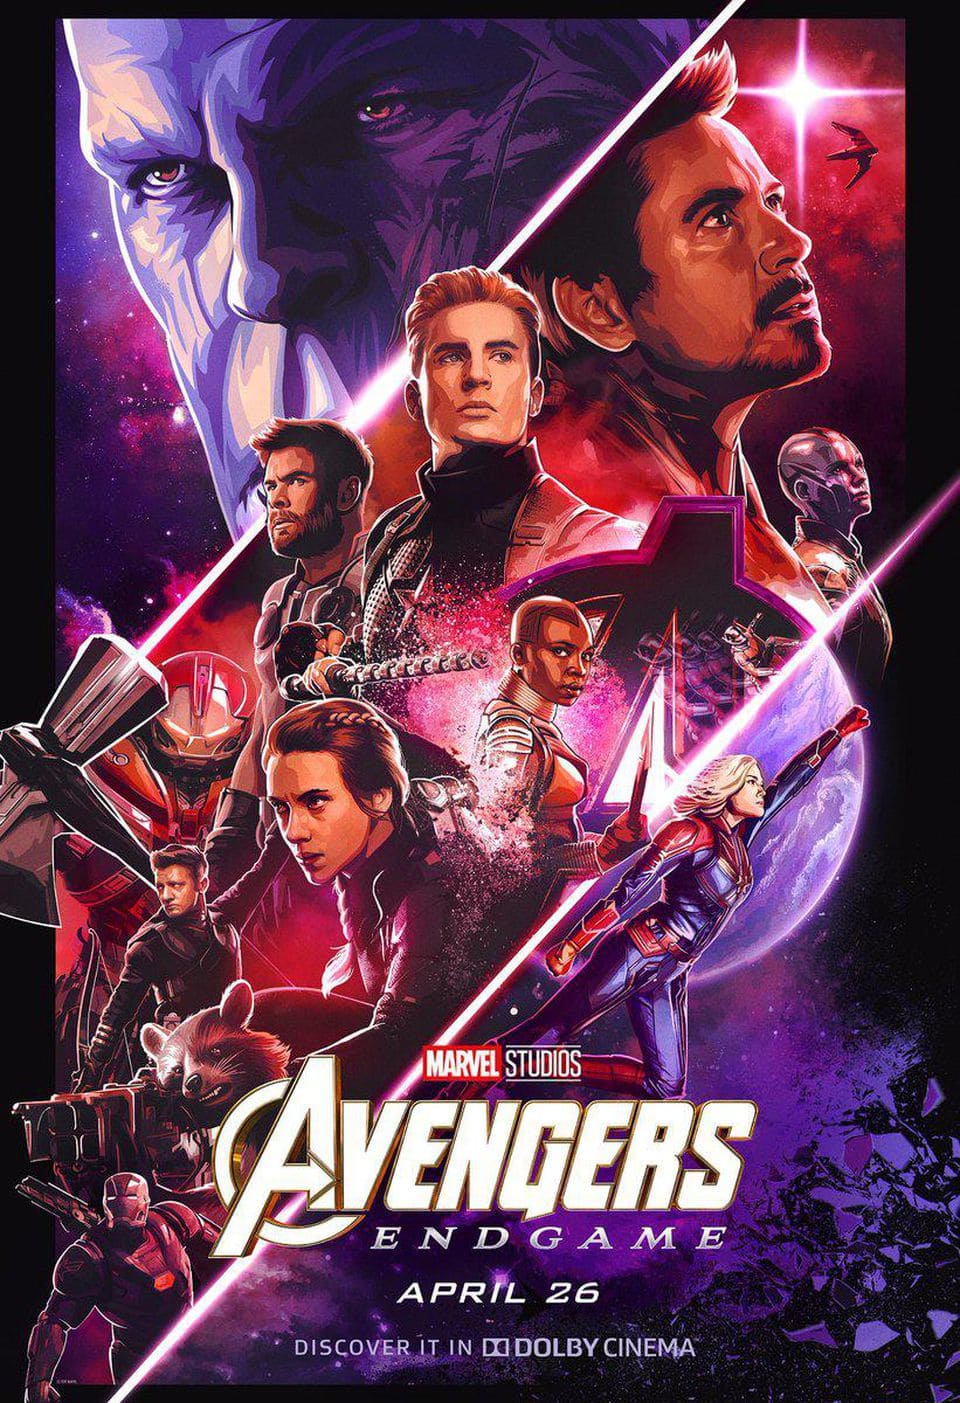 Download Avengers Endgame (2019) Hindi Dubbed Movie In Techoffical.com